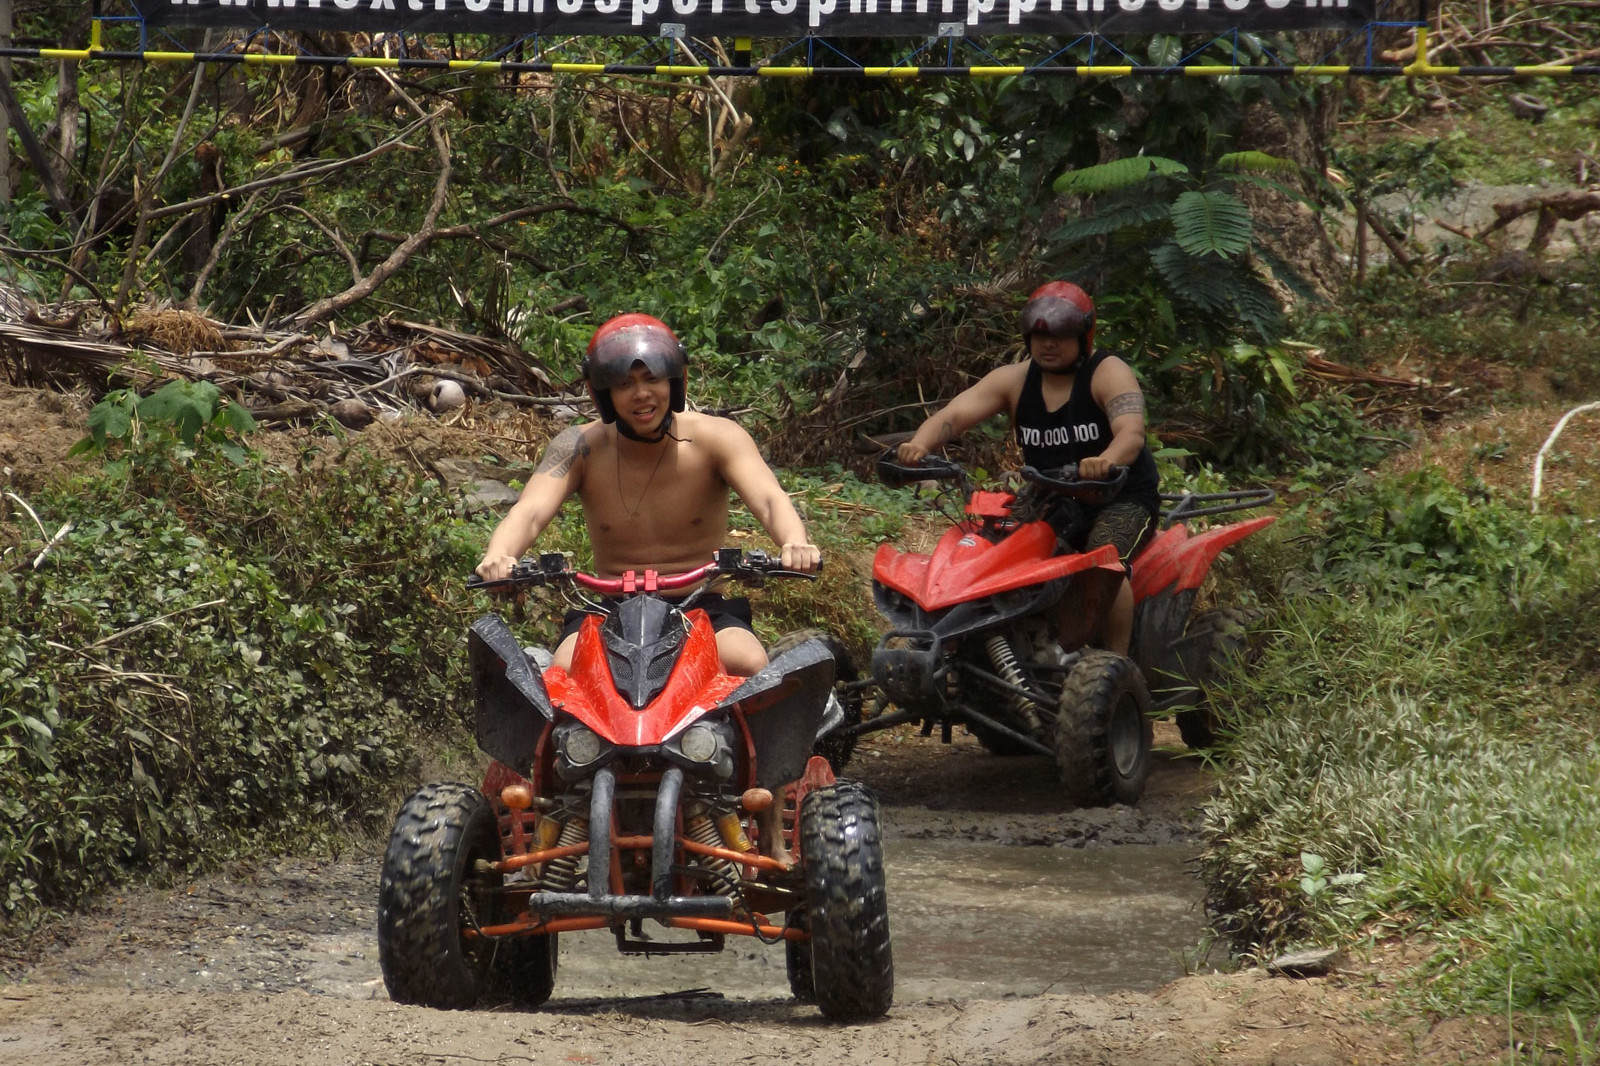 One of the hurt pumping activities in Puerto galera is riding our ATV in our adventure park off-read track.